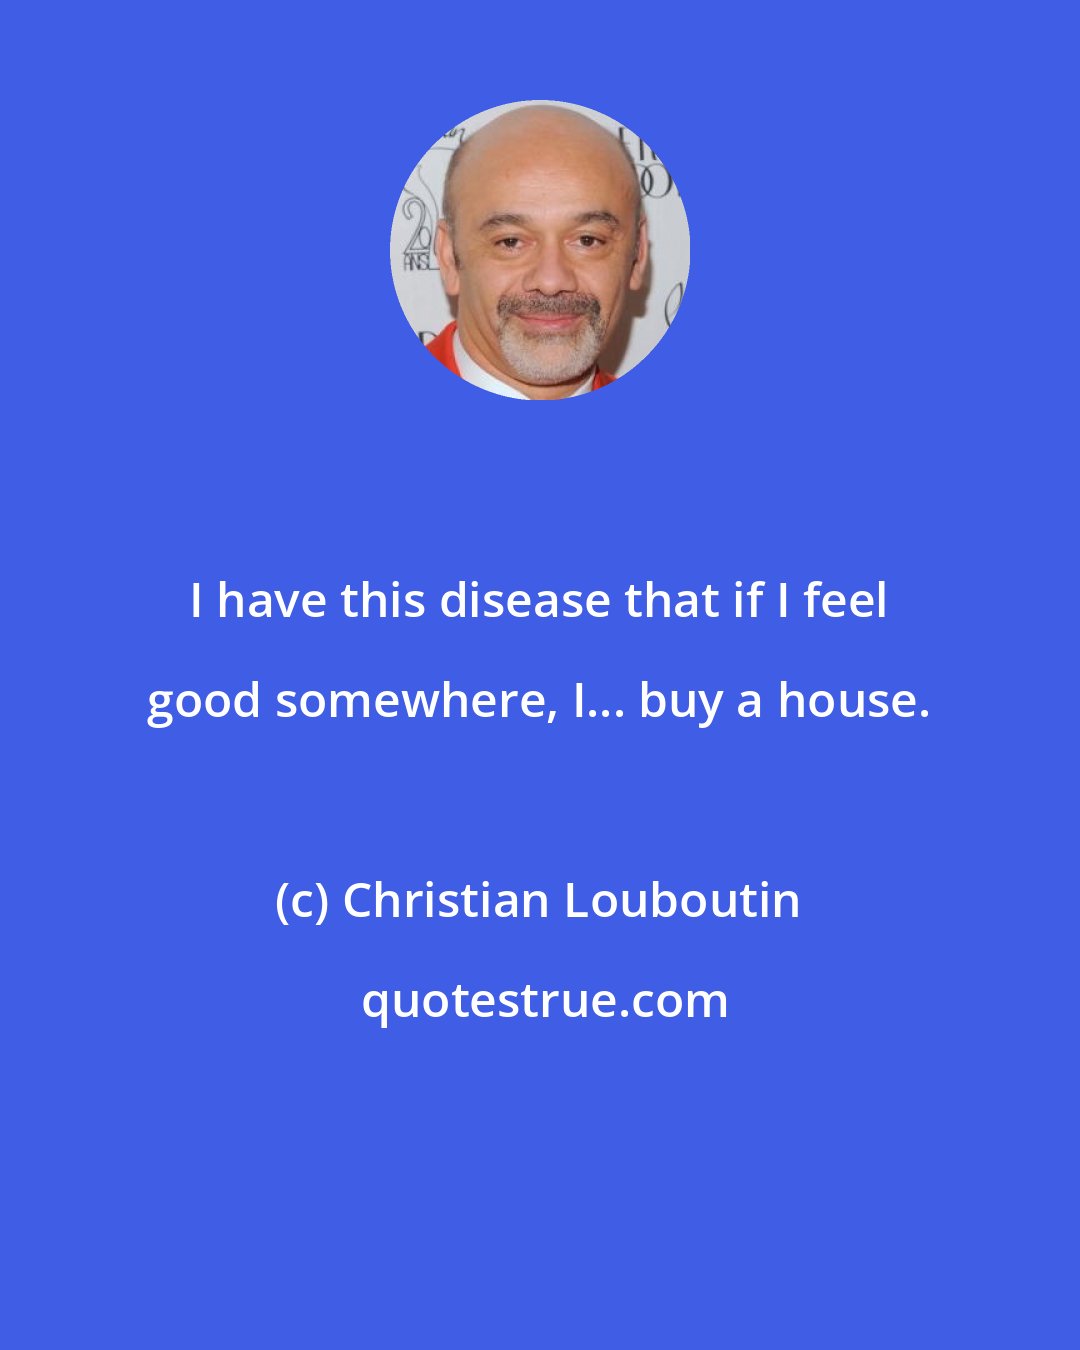 Christian Louboutin: I have this disease that if I feel good somewhere, I... buy a house.